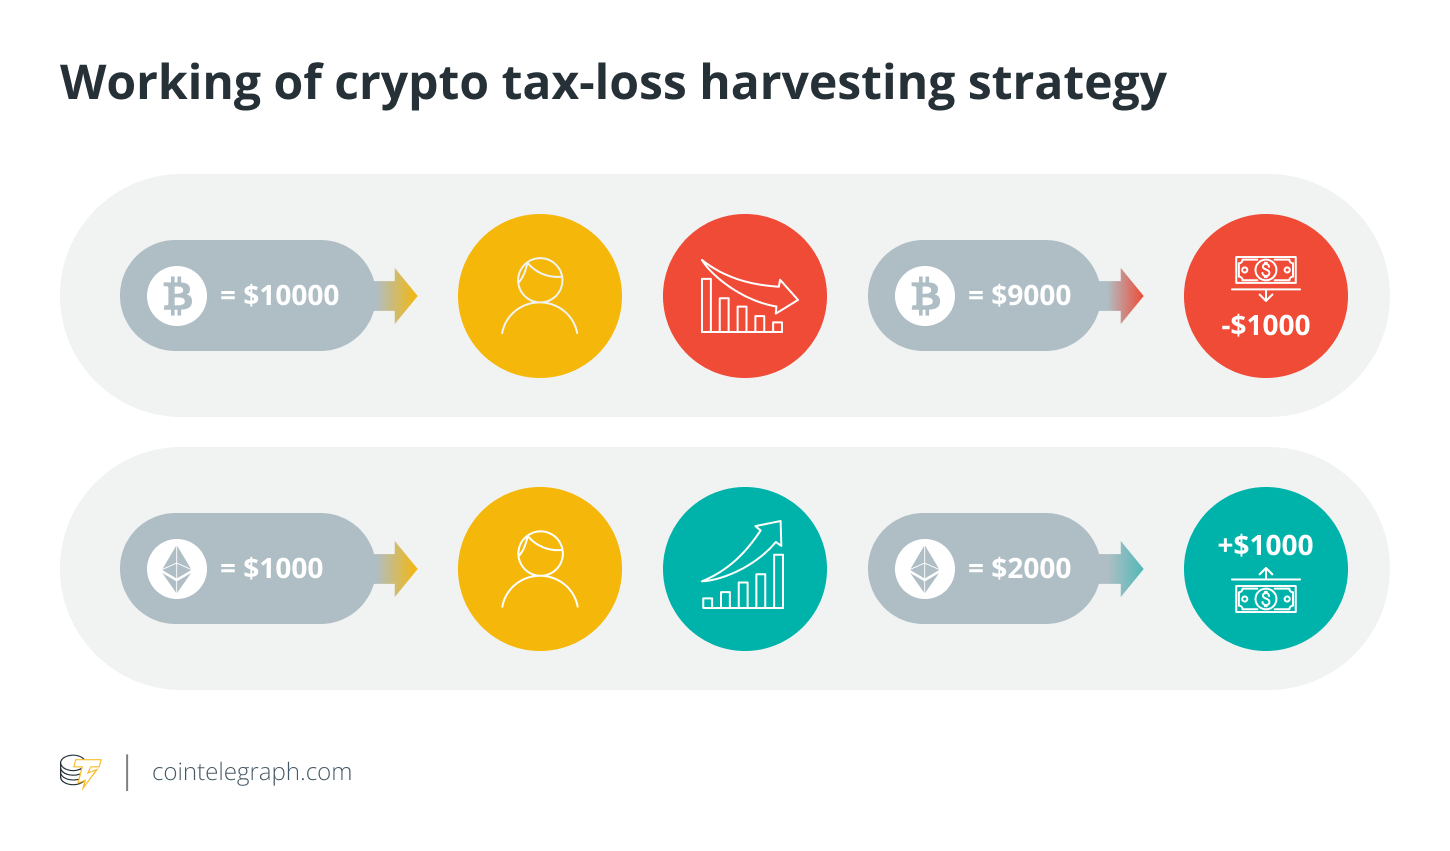 Working of crypto tax-loss harvesting strategy